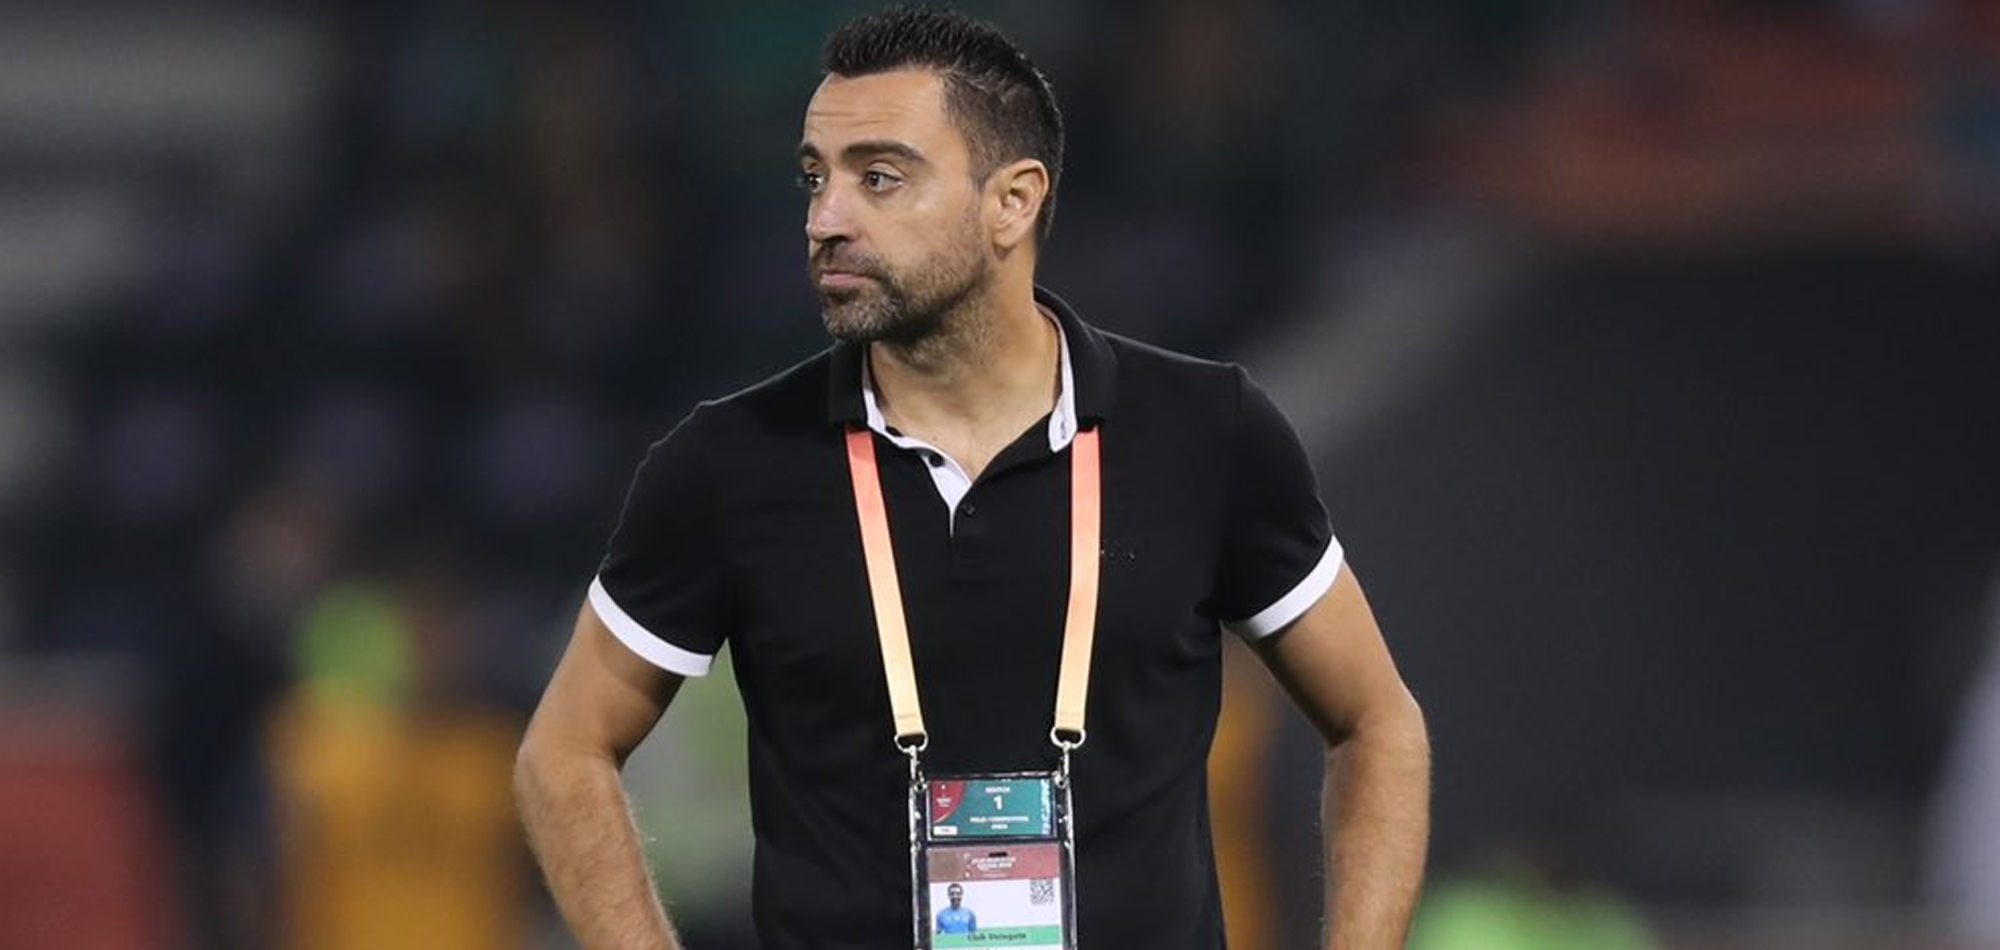 AL SADD SAY DEAL AGREED FOR XAVI BUT BARCA WAIT ON ANNOUNCEMENT